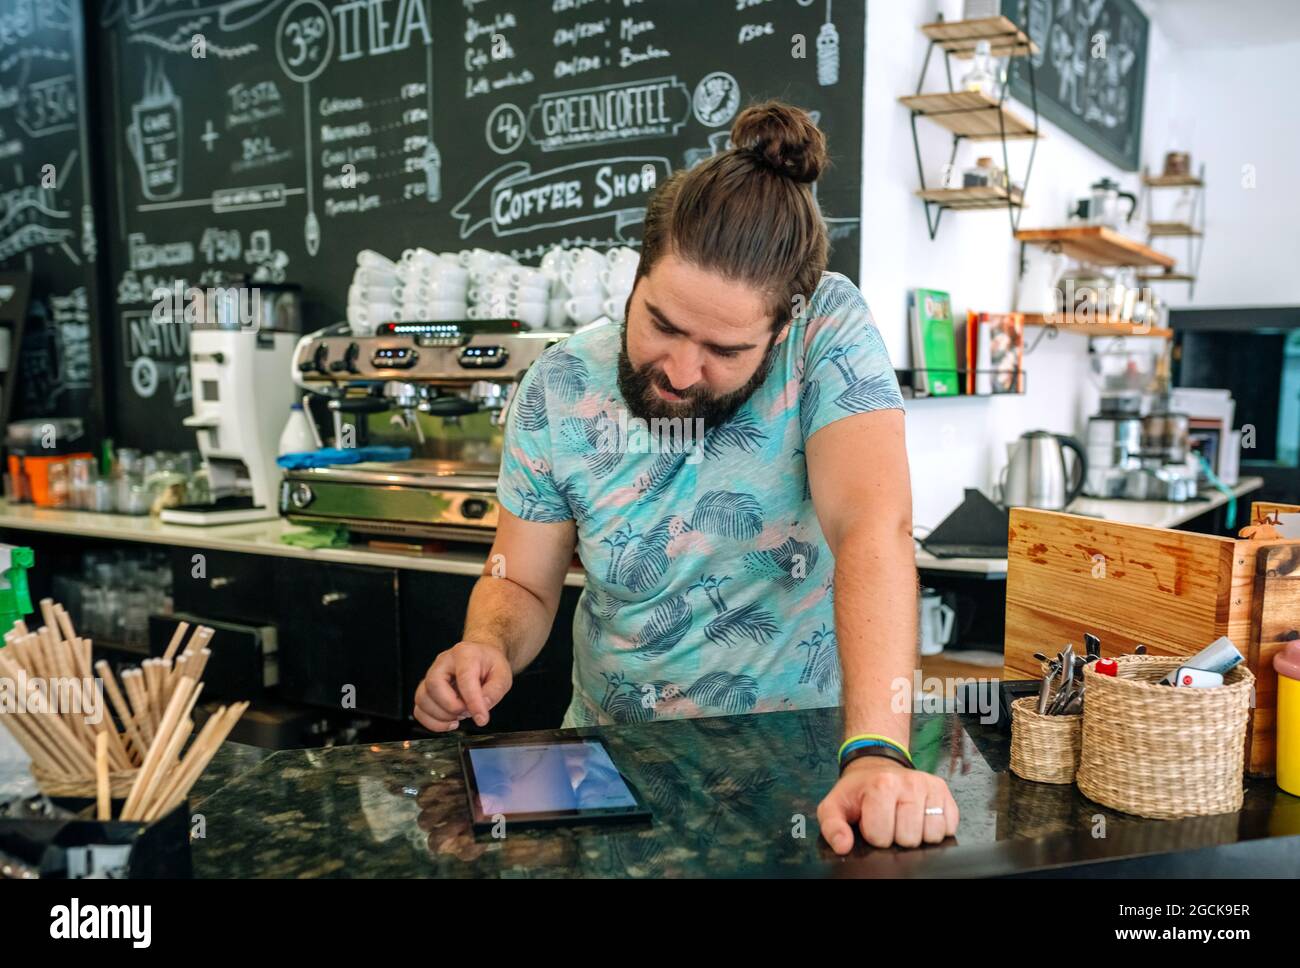 Coffee shop owner reviewing business accounts Stock Photo